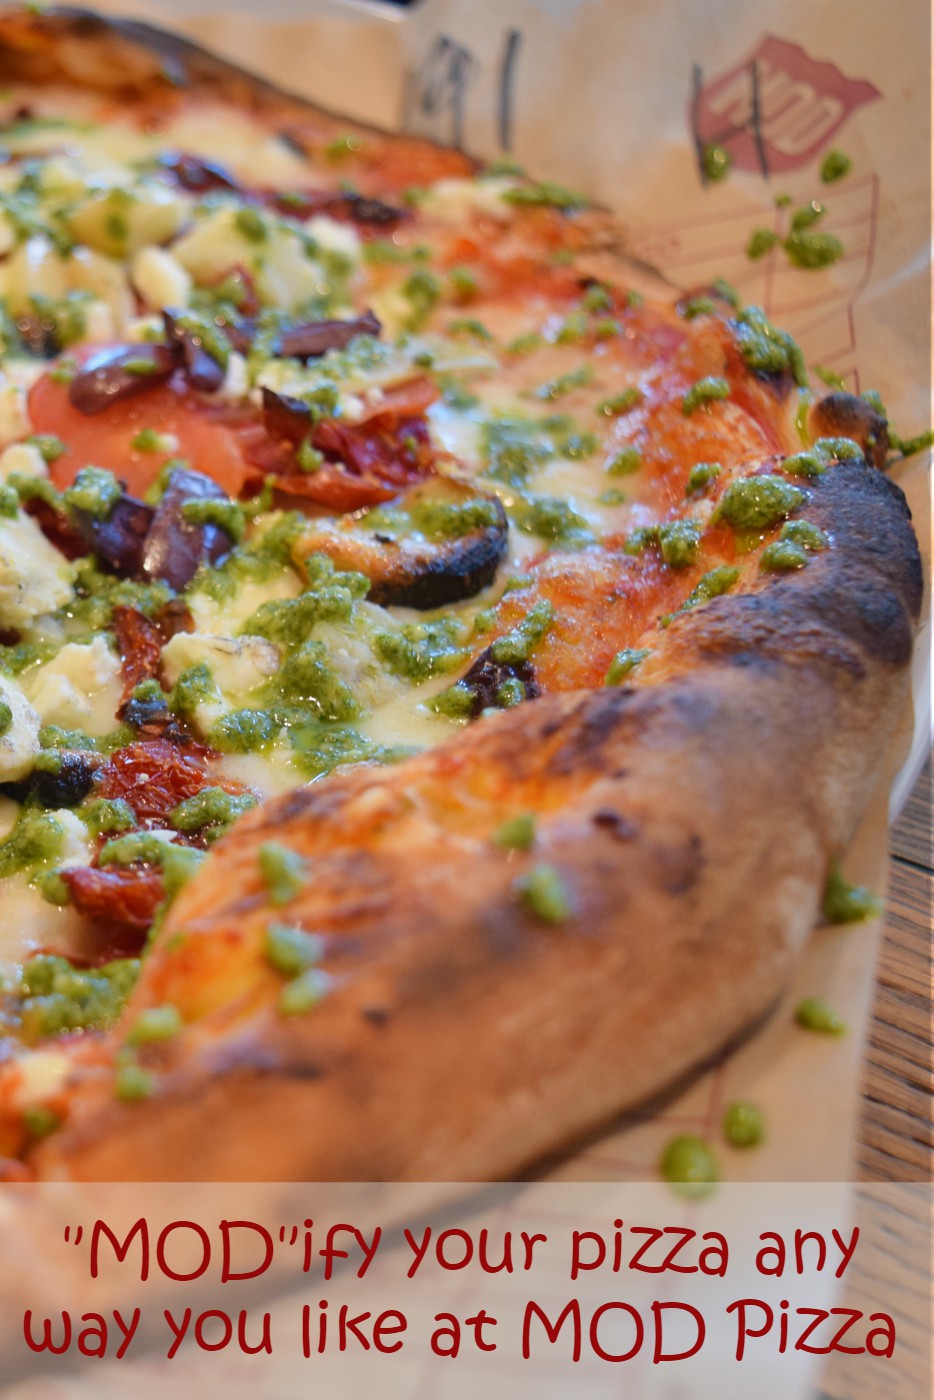 MOD Pizza means you make it however YOU like it. Check out the review of the vegan and dairy free options, as well as gluten free pizzas you can make to suit your mood.